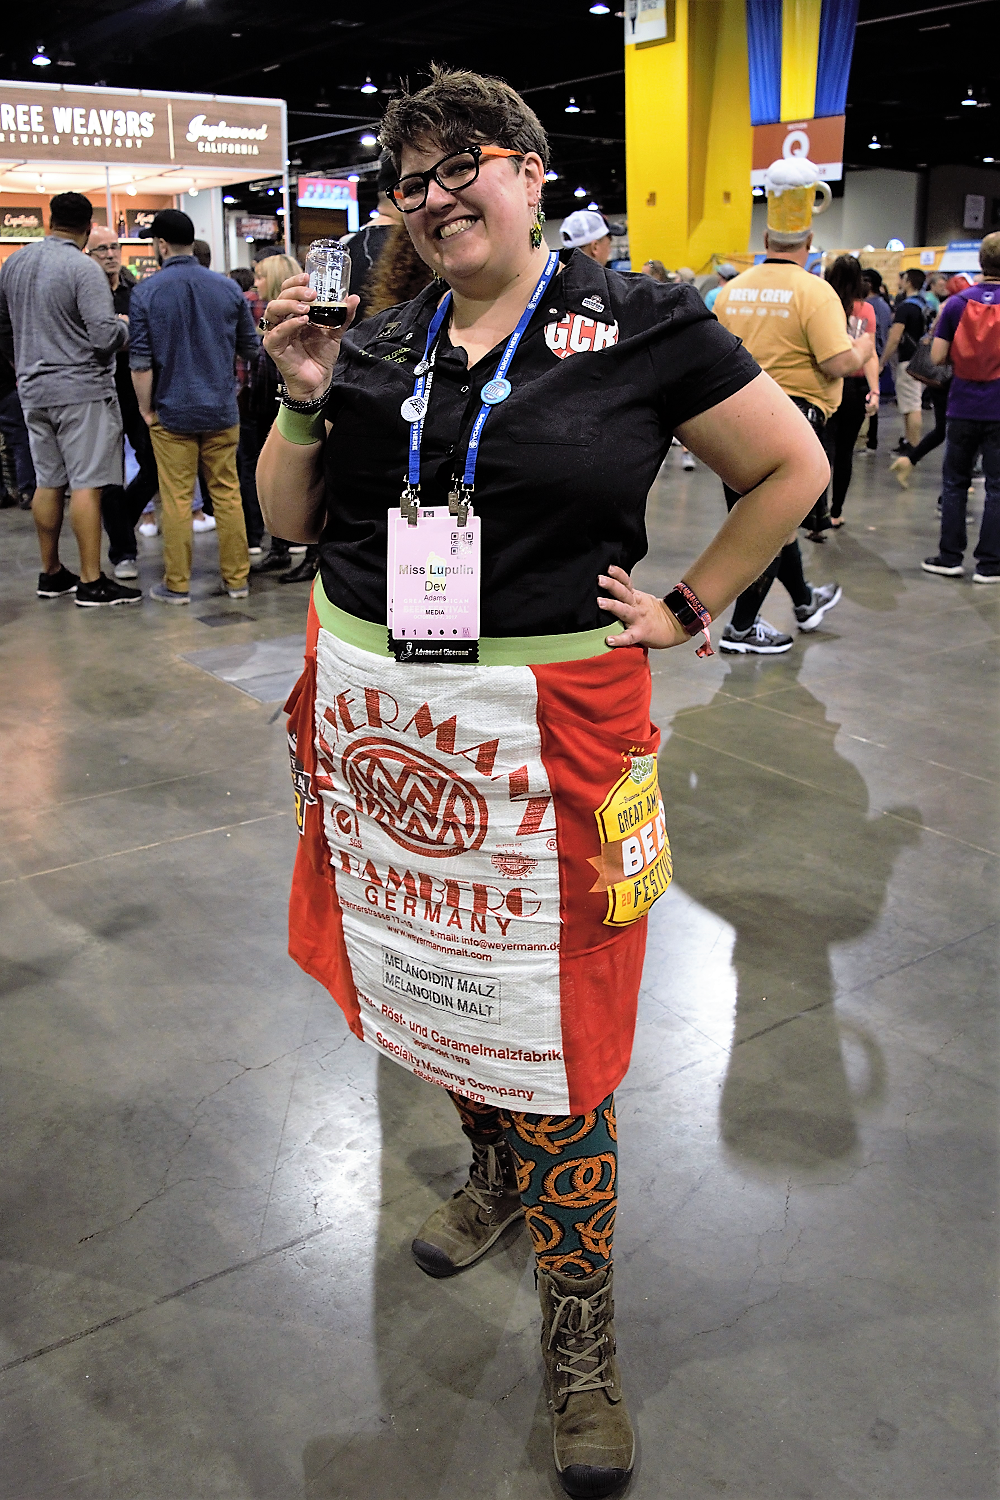 Guide to the Great American Beer Festival, with a map of the 2017 GABF award-winning beers - now get out there and drink local!